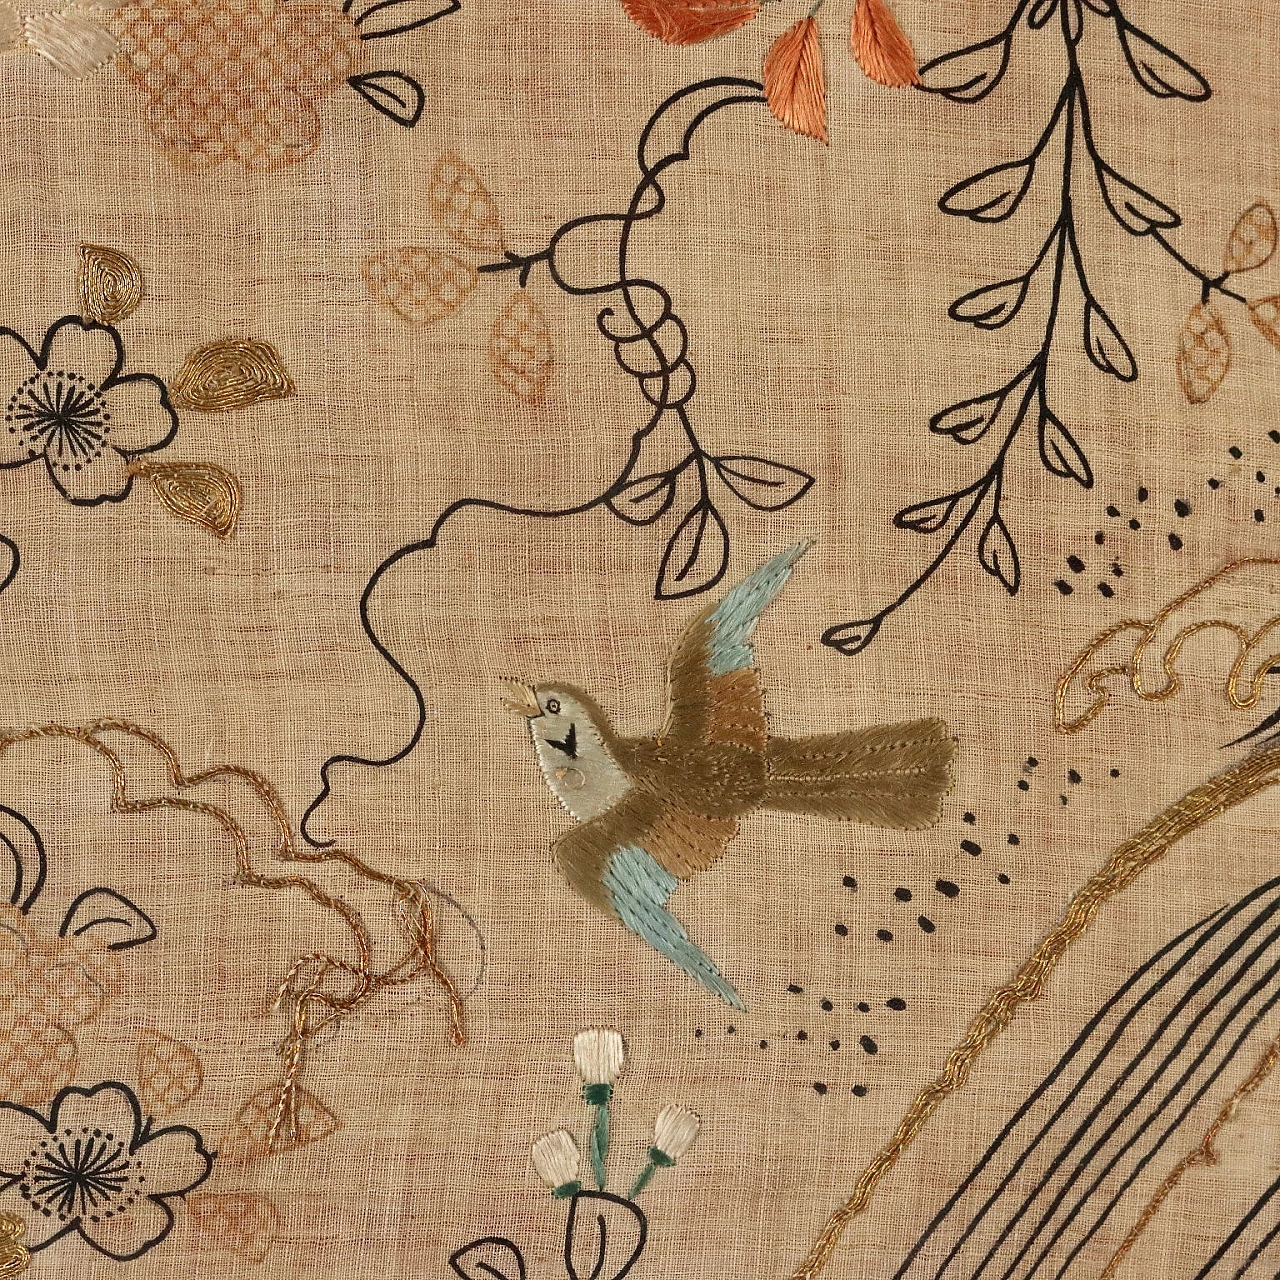 Naturalistic subject, embroidery panel, late 19th century 4